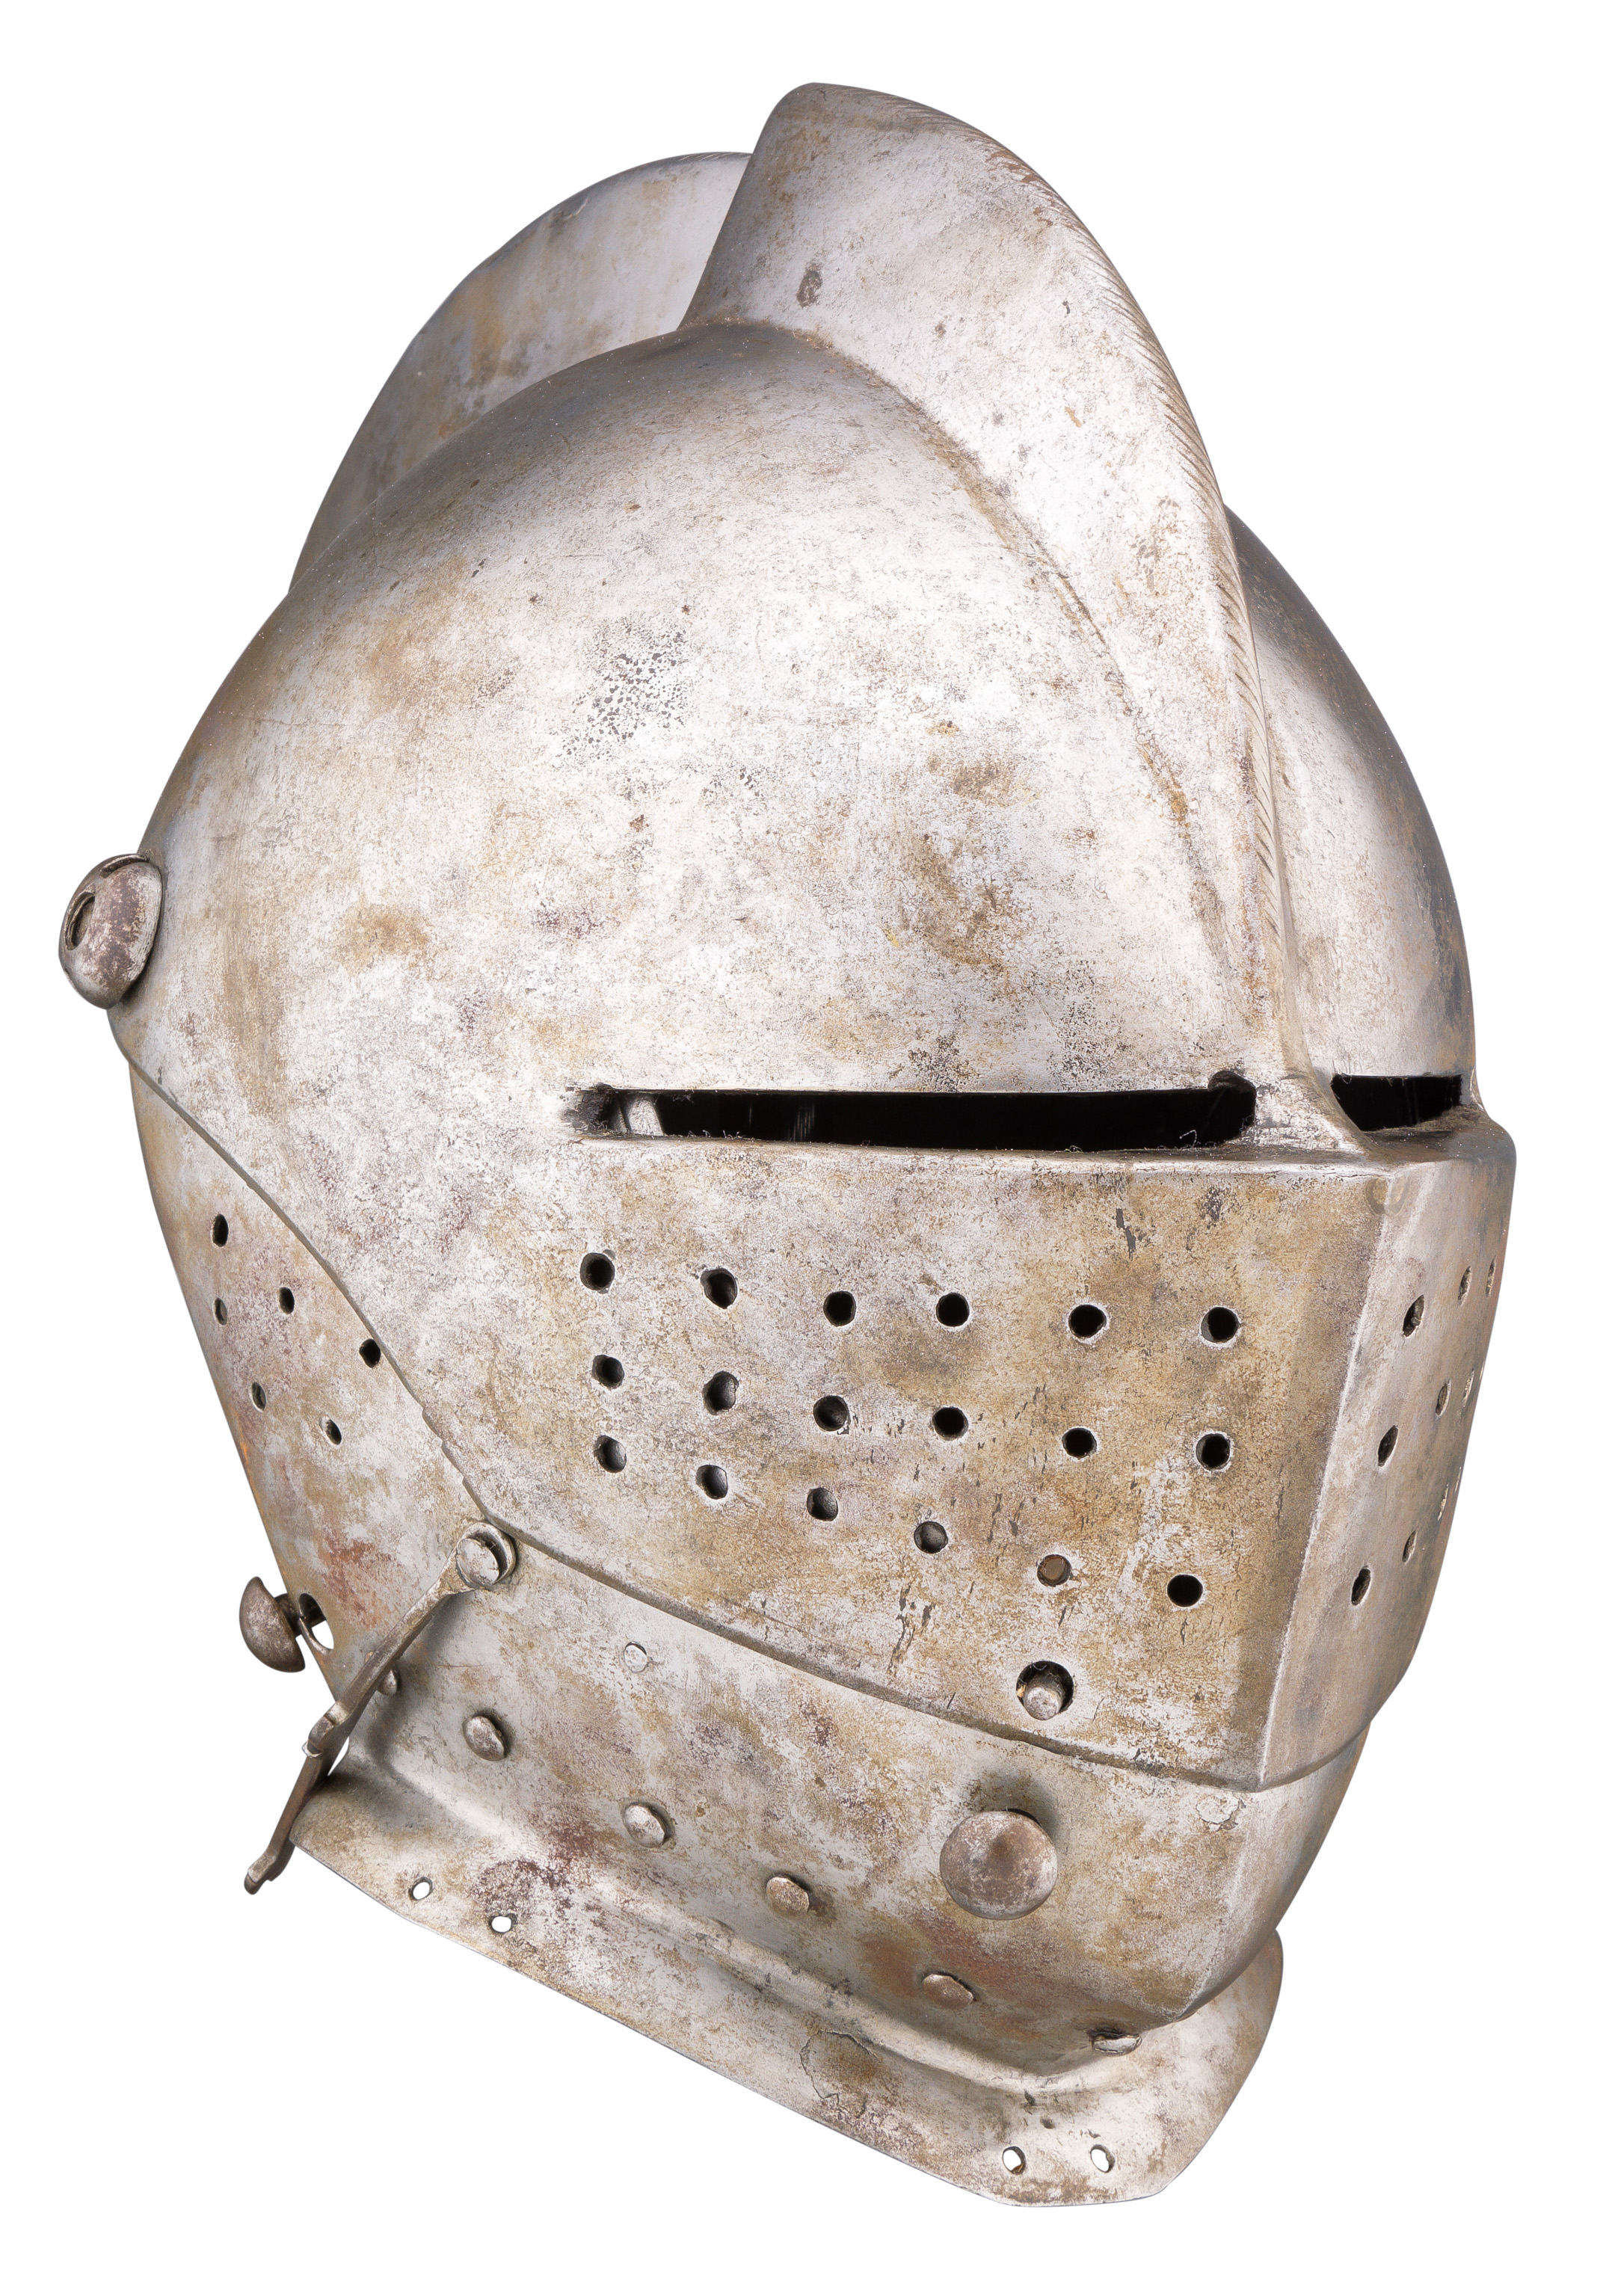 A GERMAN CLOSE HELMET FOR TOURNEY USE, CIRCA 1600 with rounded one-piece skull rising to a high,